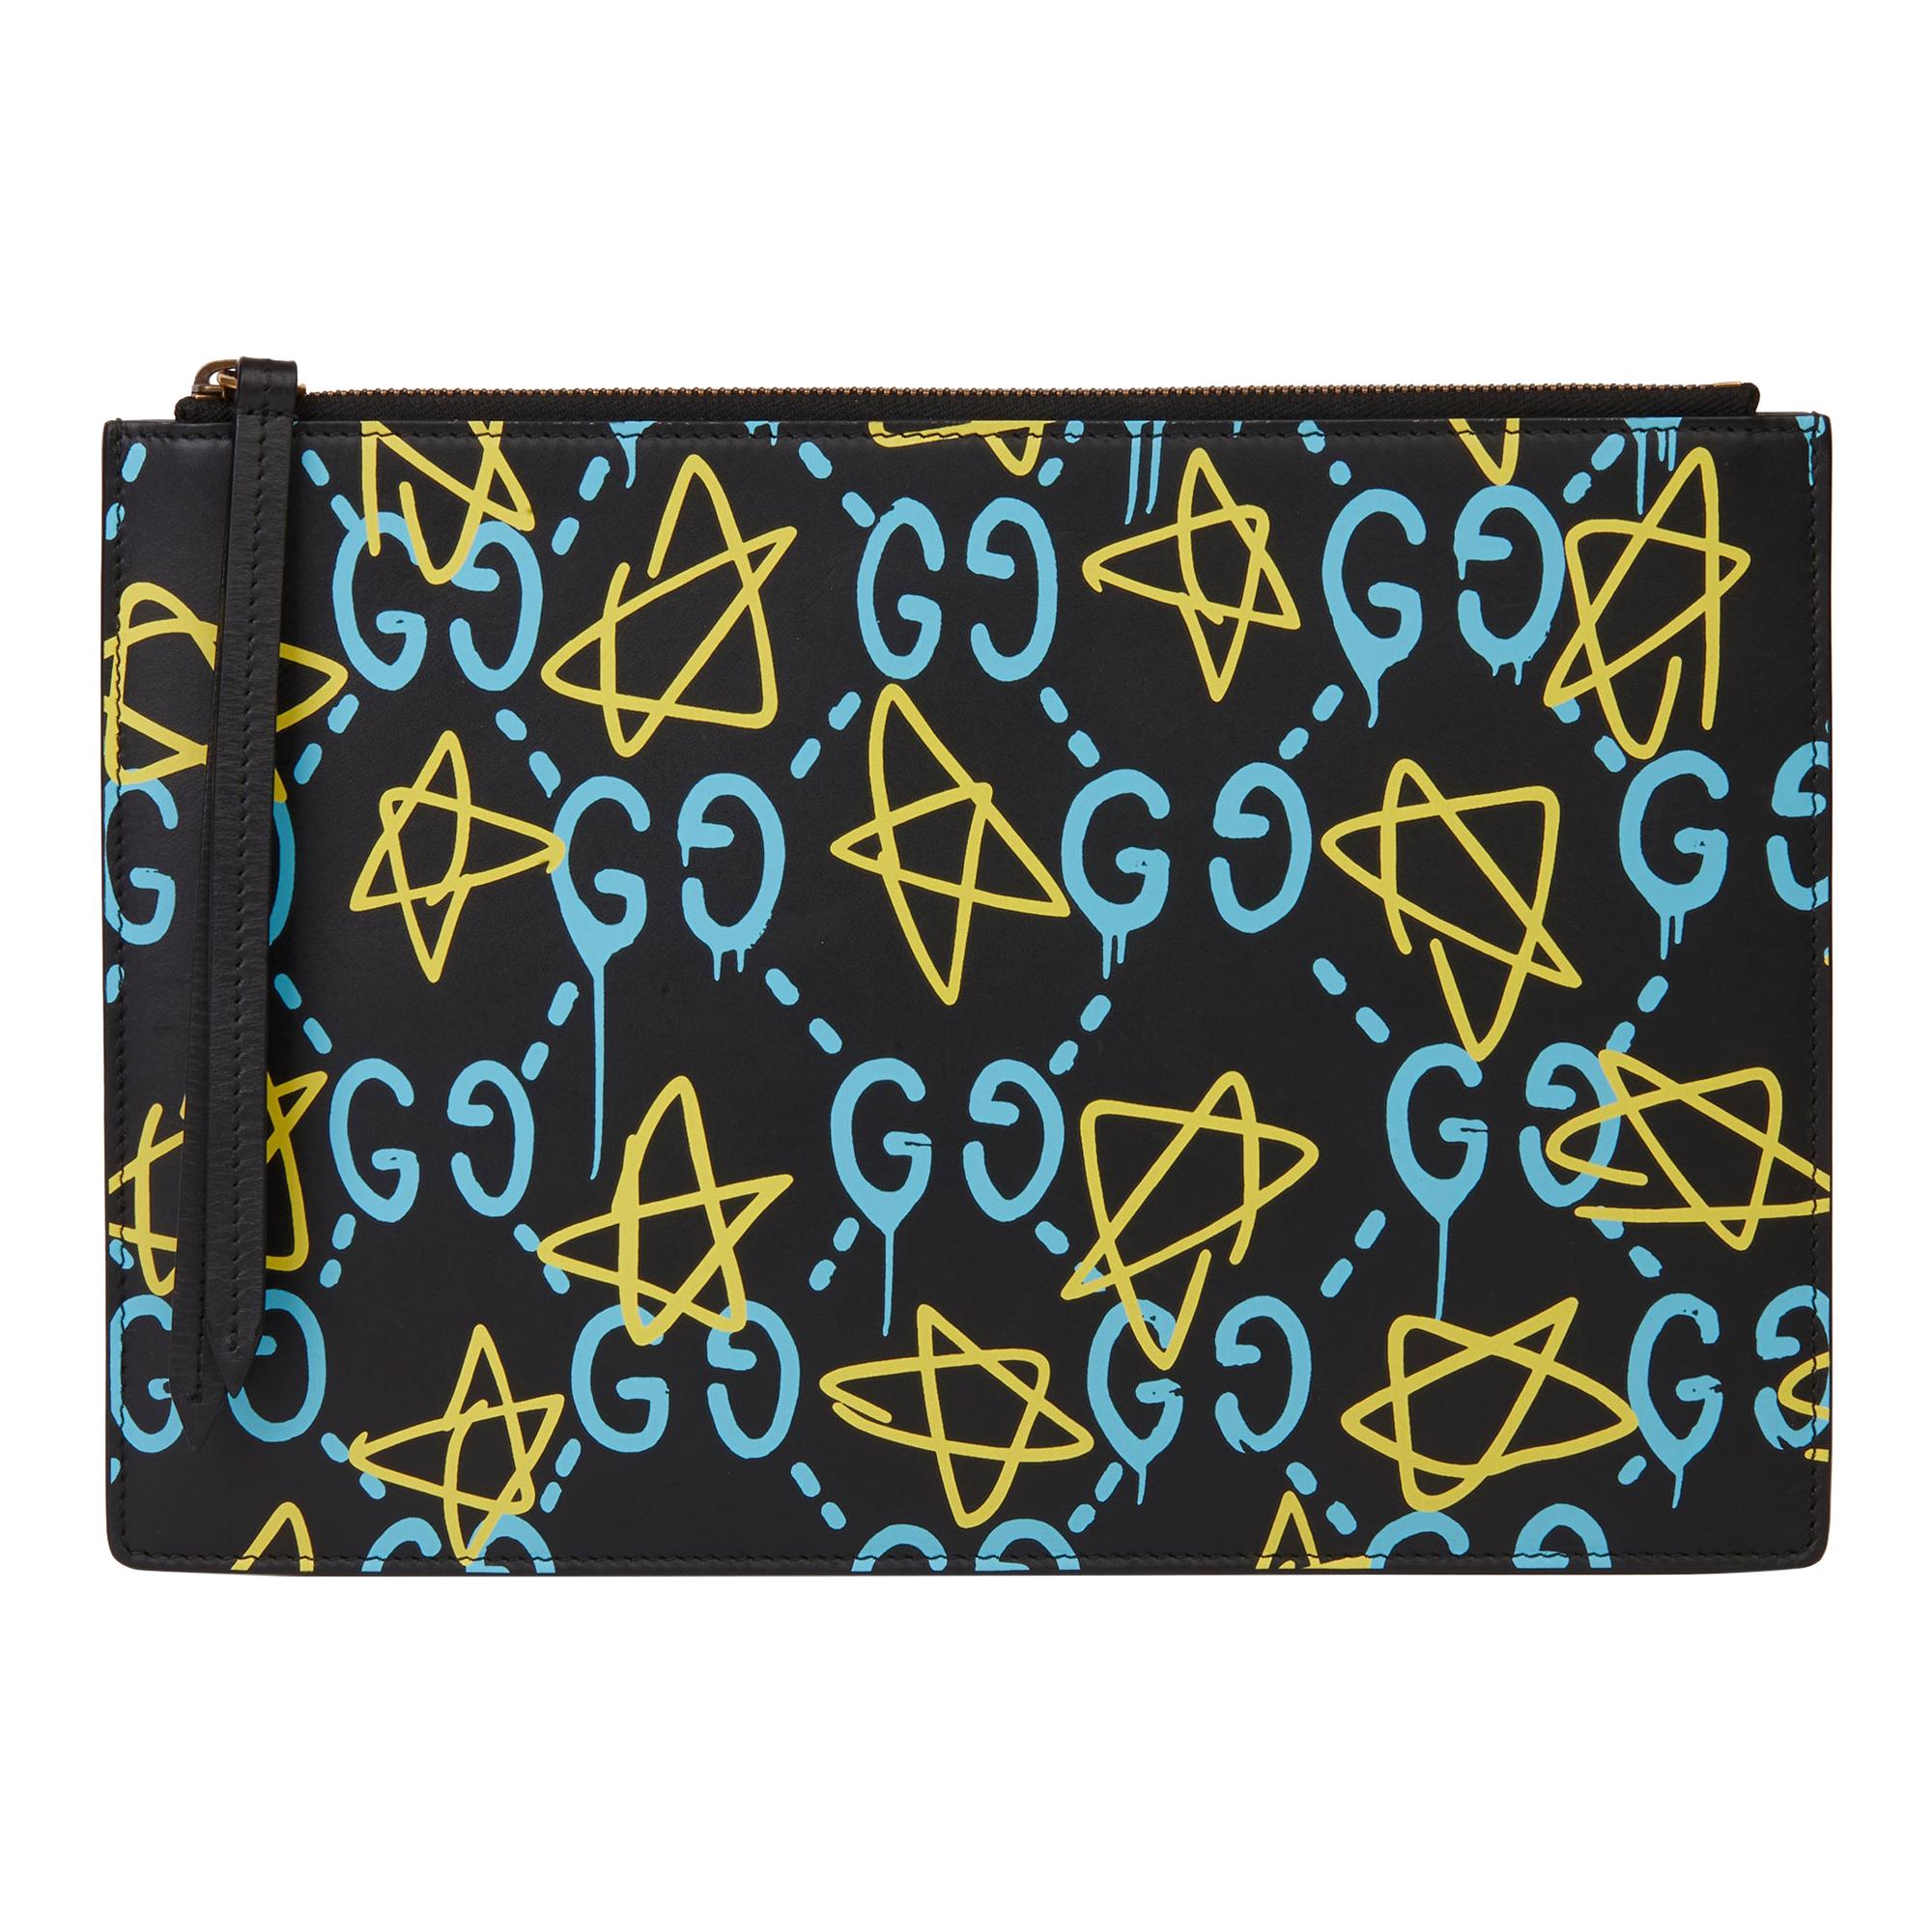 2017 Gucci Black, Blue & Yellow Calfskin Leather Gucci-Ghost Pouch